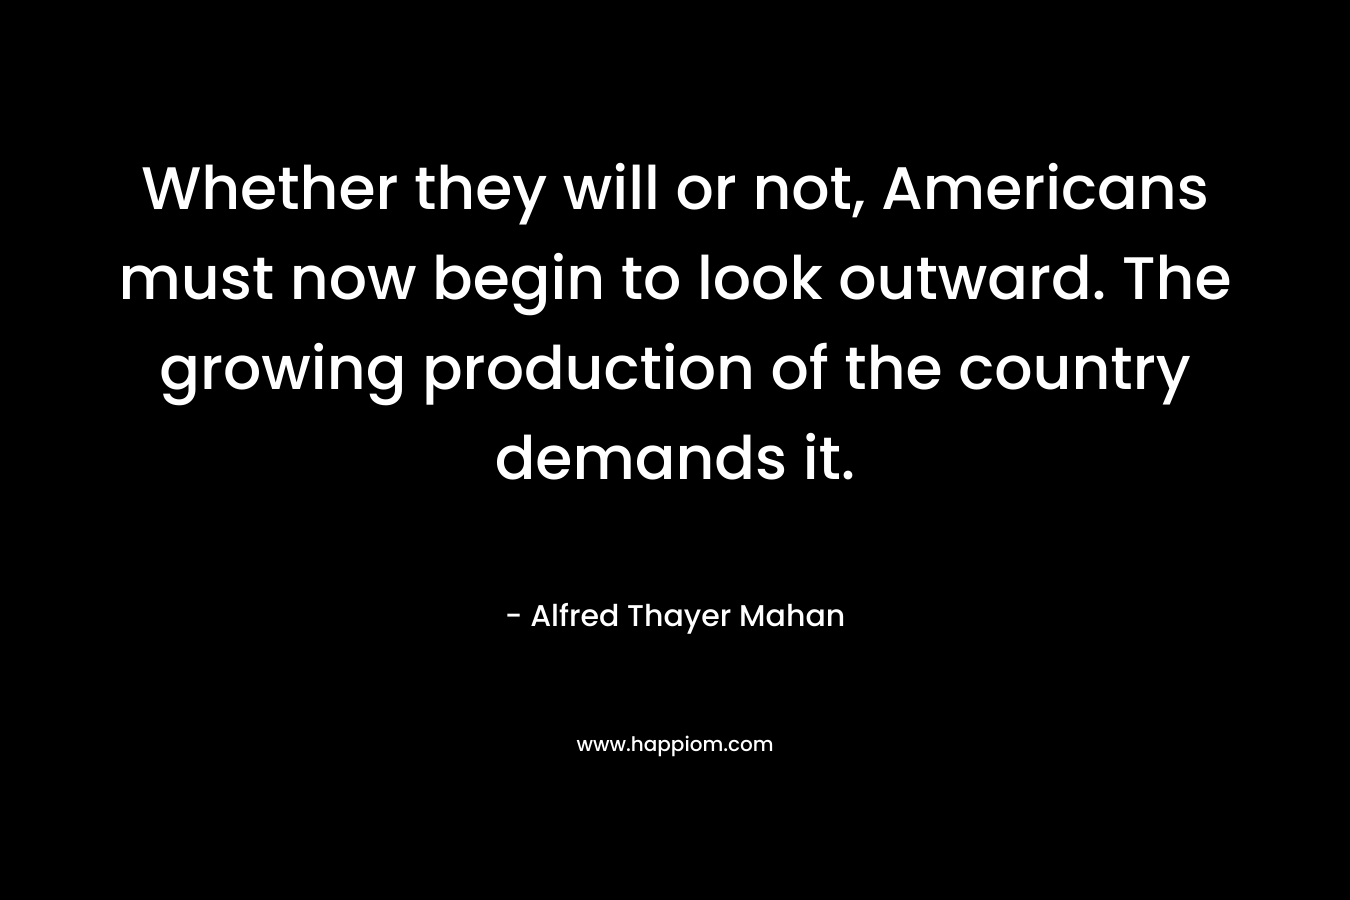 Whether they will or not, Americans must now begin to look outward. The growing production of the country demands it. – Alfred Thayer Mahan